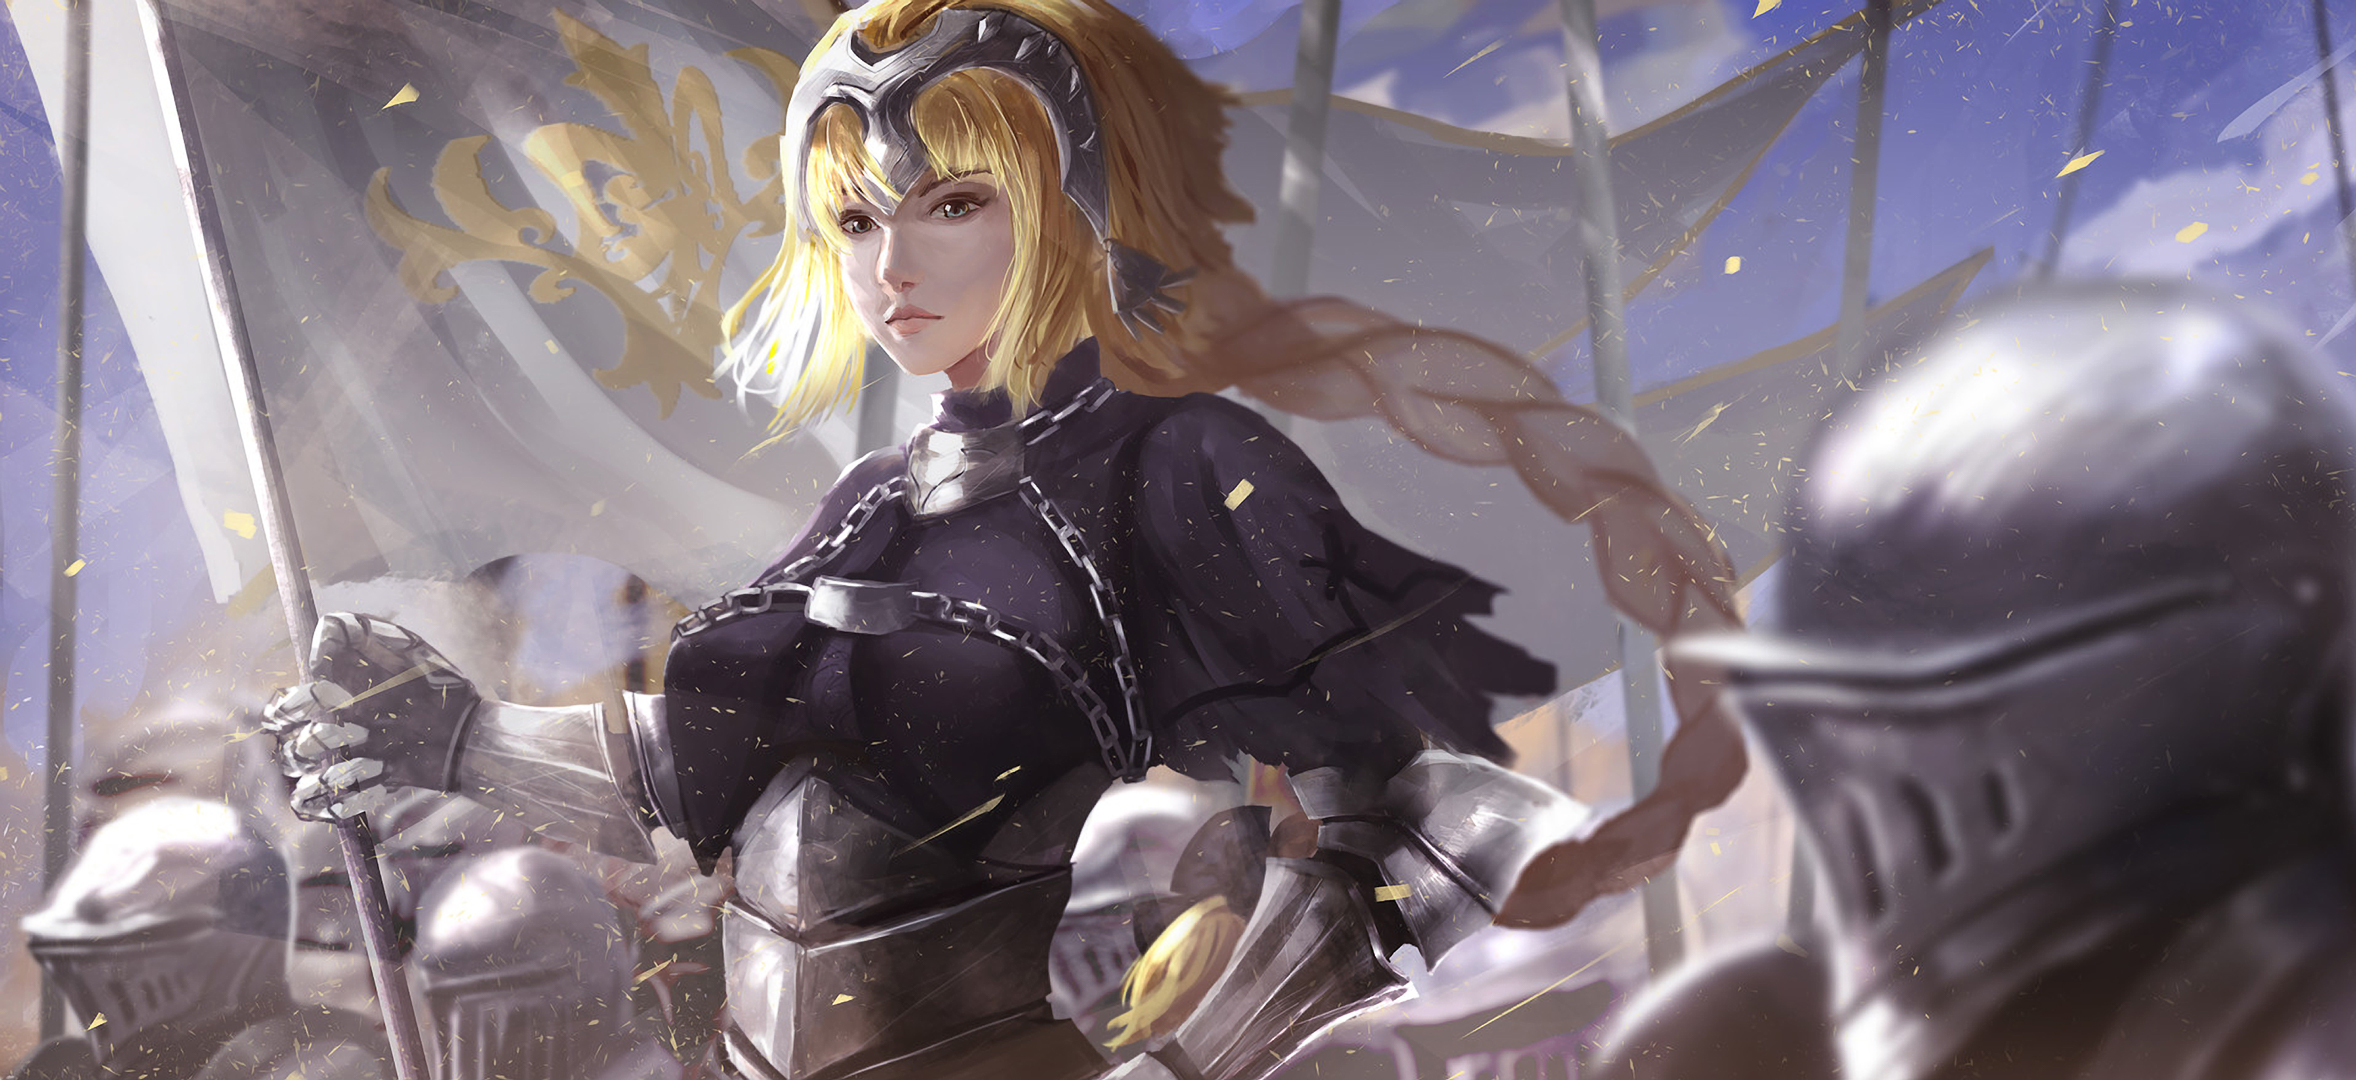 Wallpaper for mobile devices armor, jeanne d'arc (fate series), fate/grand order, anime